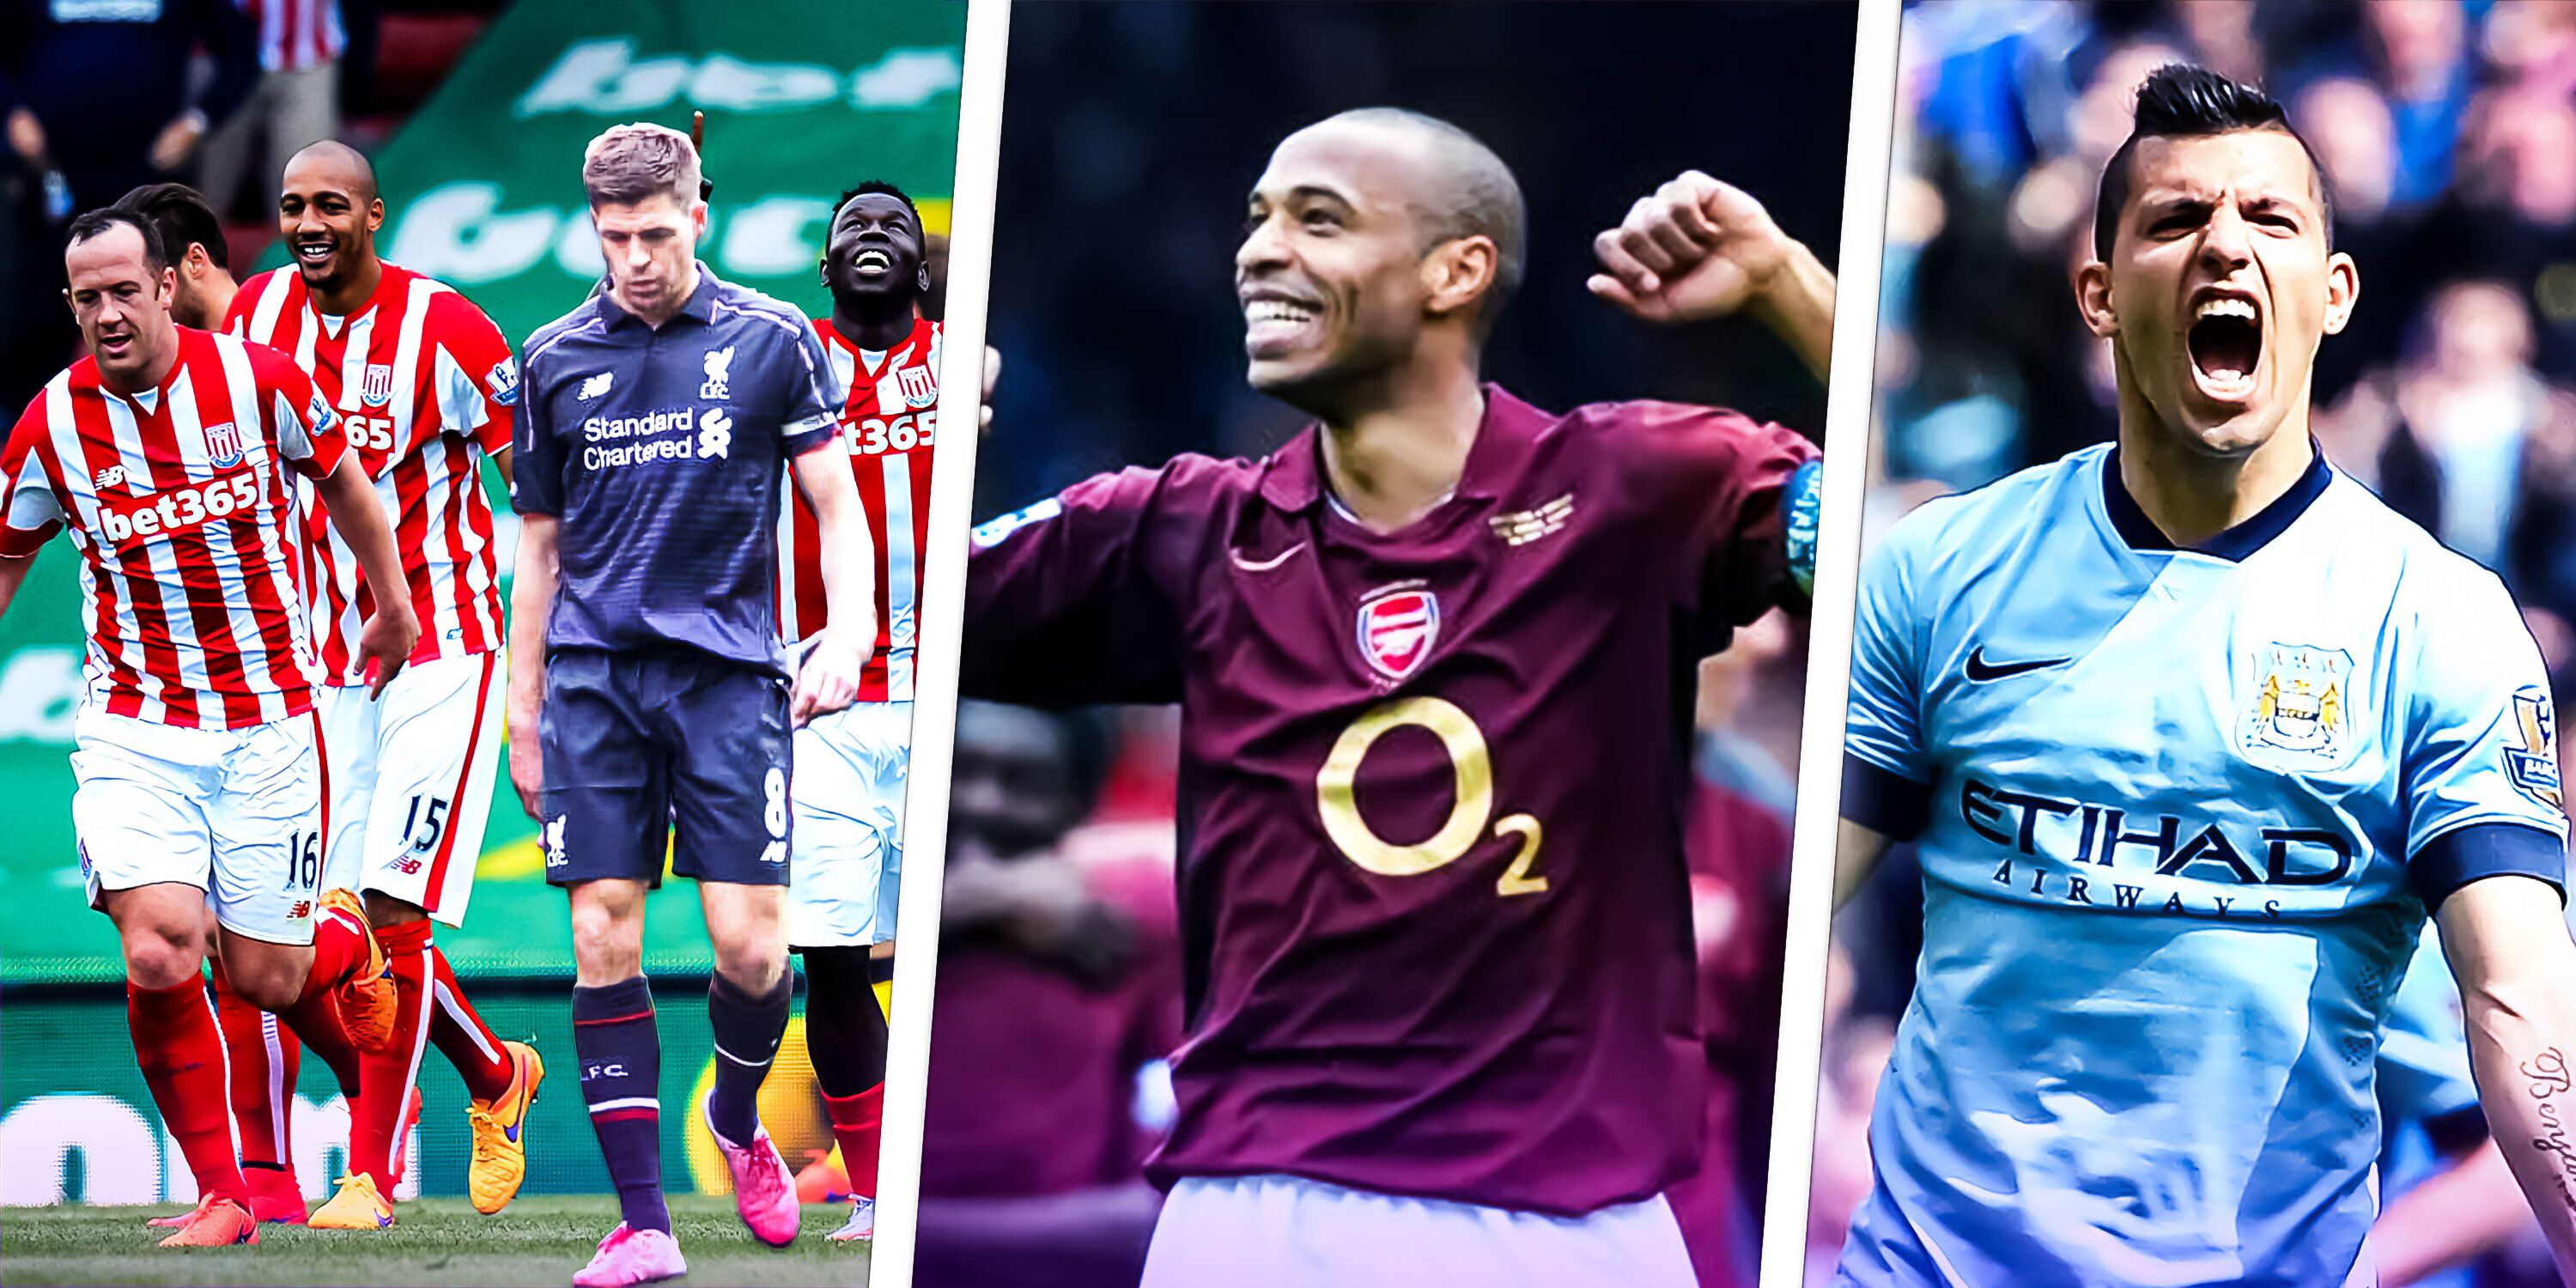 Craziest results on the final day of the Premier League season